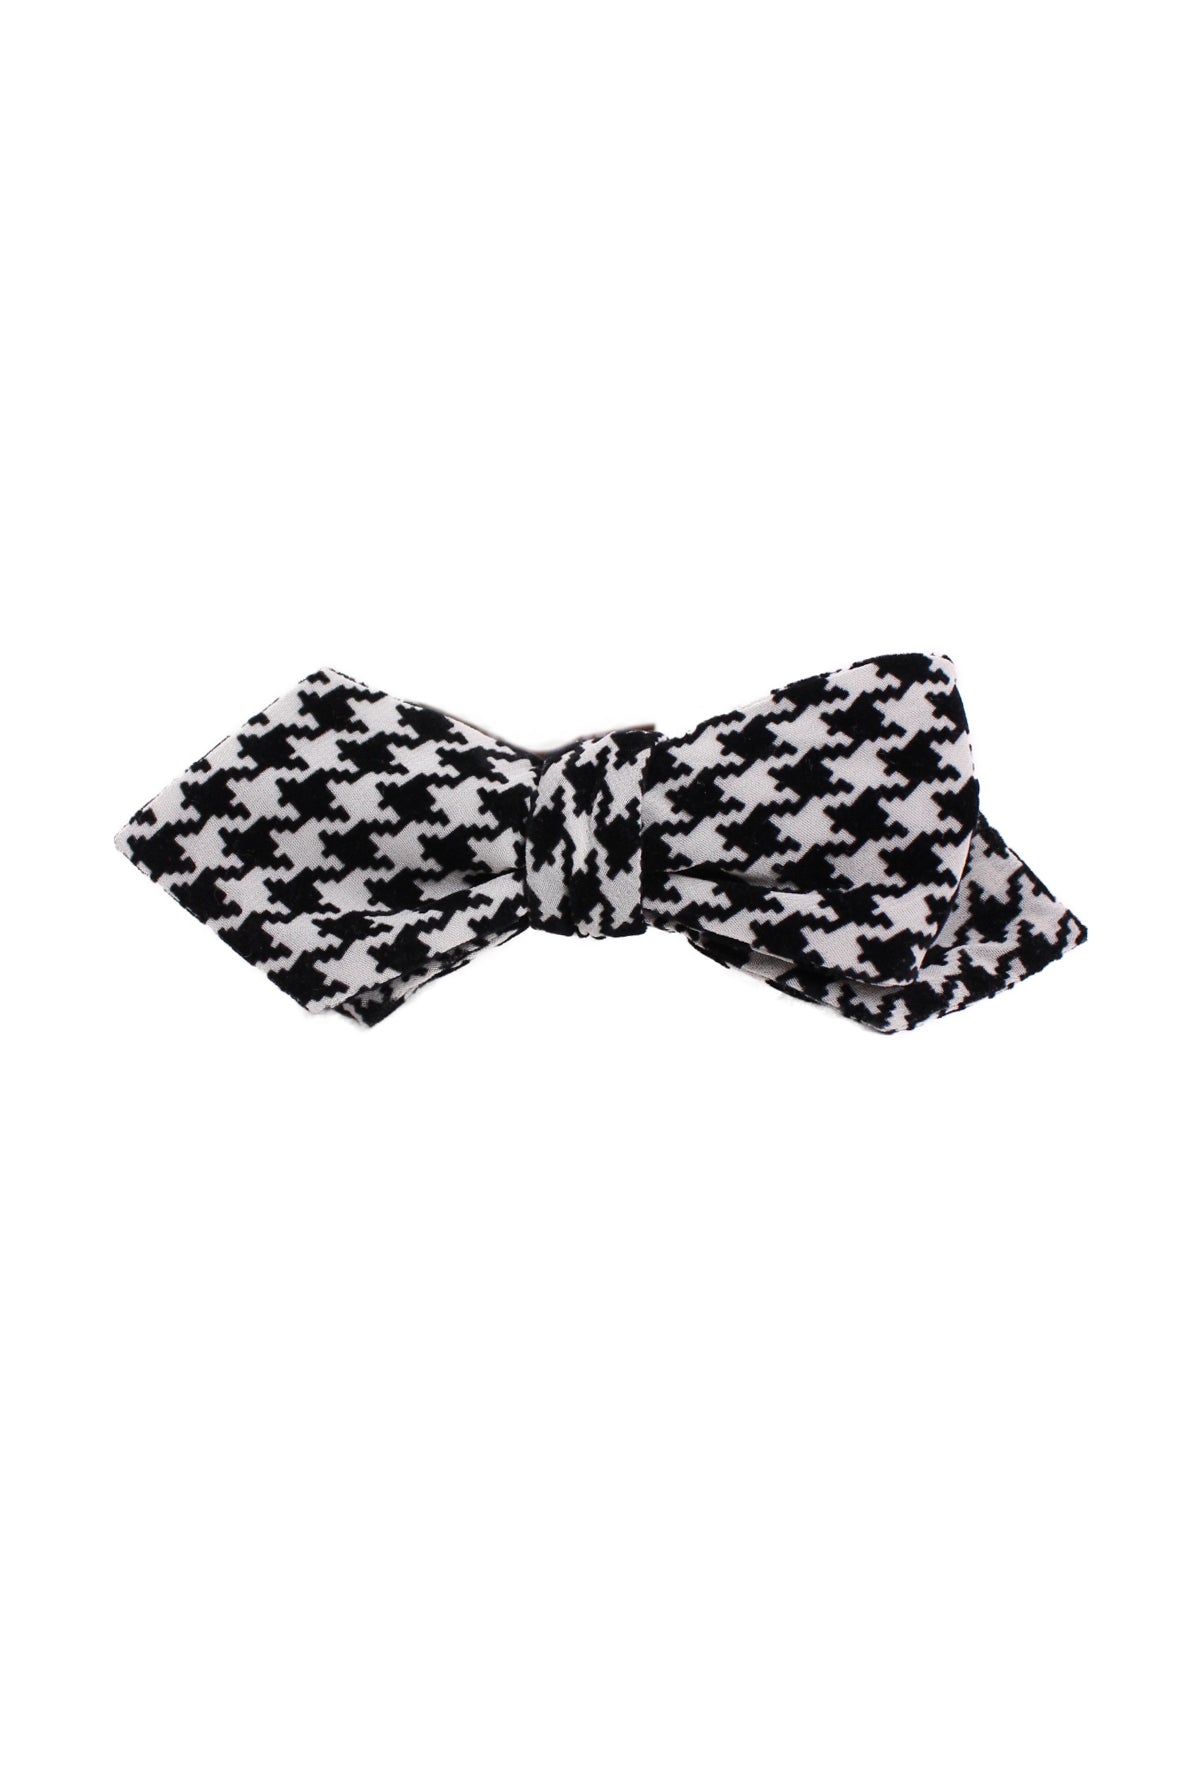 front angle of alexander olch black and white velvet houndstooth bowtie. features black on black pattern, brown satin backing, adjustable width, and pre-tied bow. 